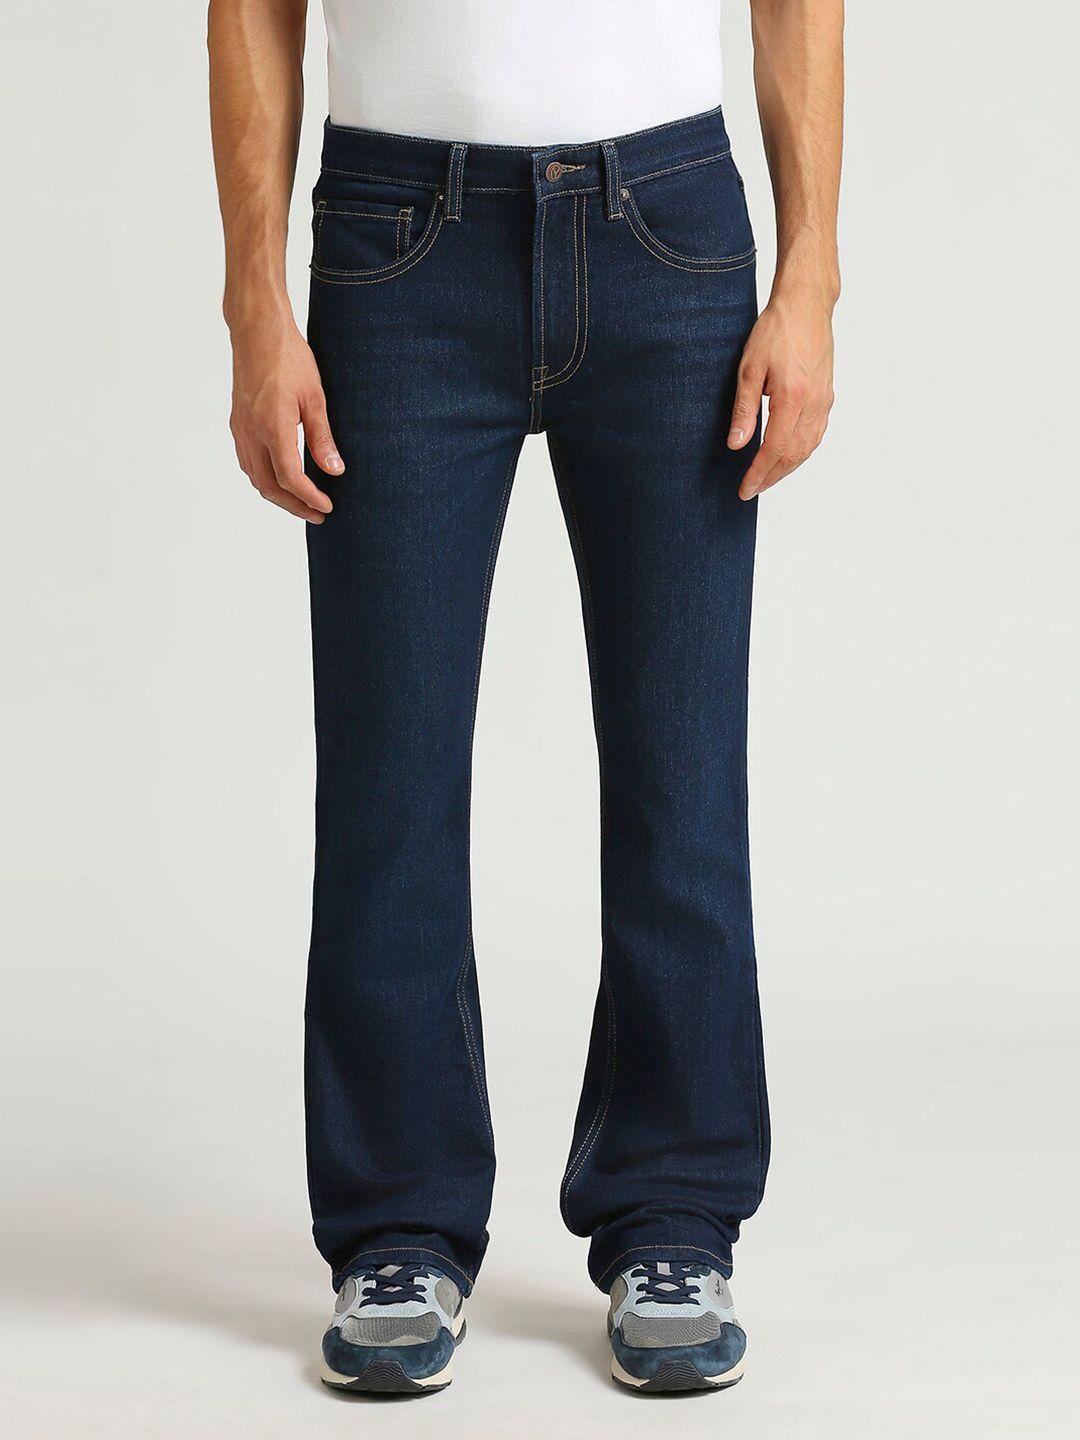 pepe jeans men bootcut clean look stretchable jeans